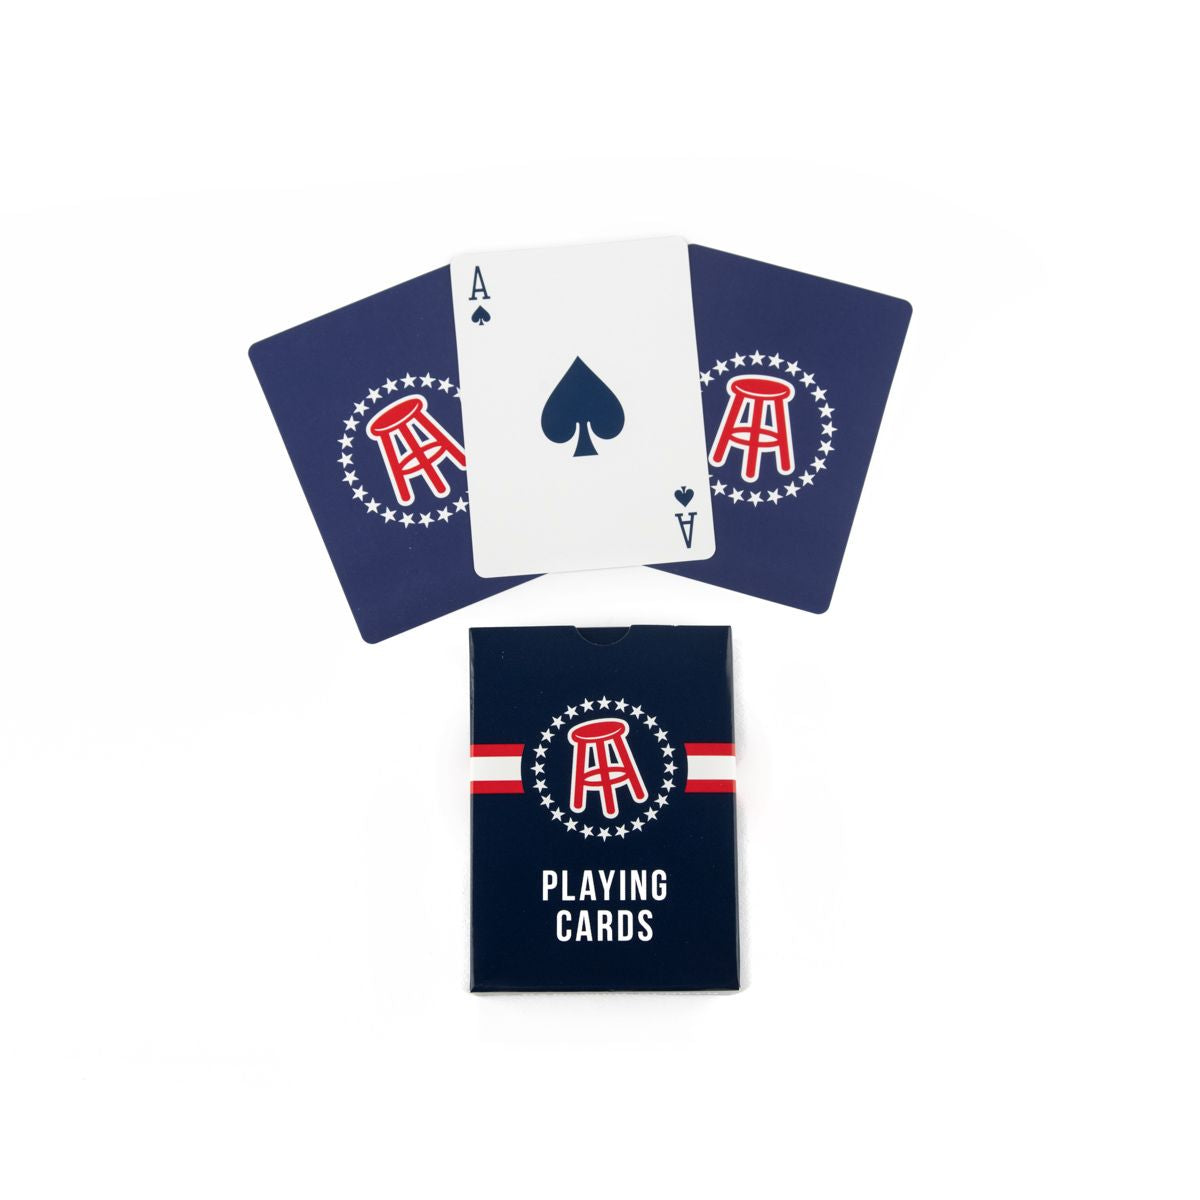 Barstool Sports Playing Cards-Accessories-Barstool Sports-Navy-Barstool Sports